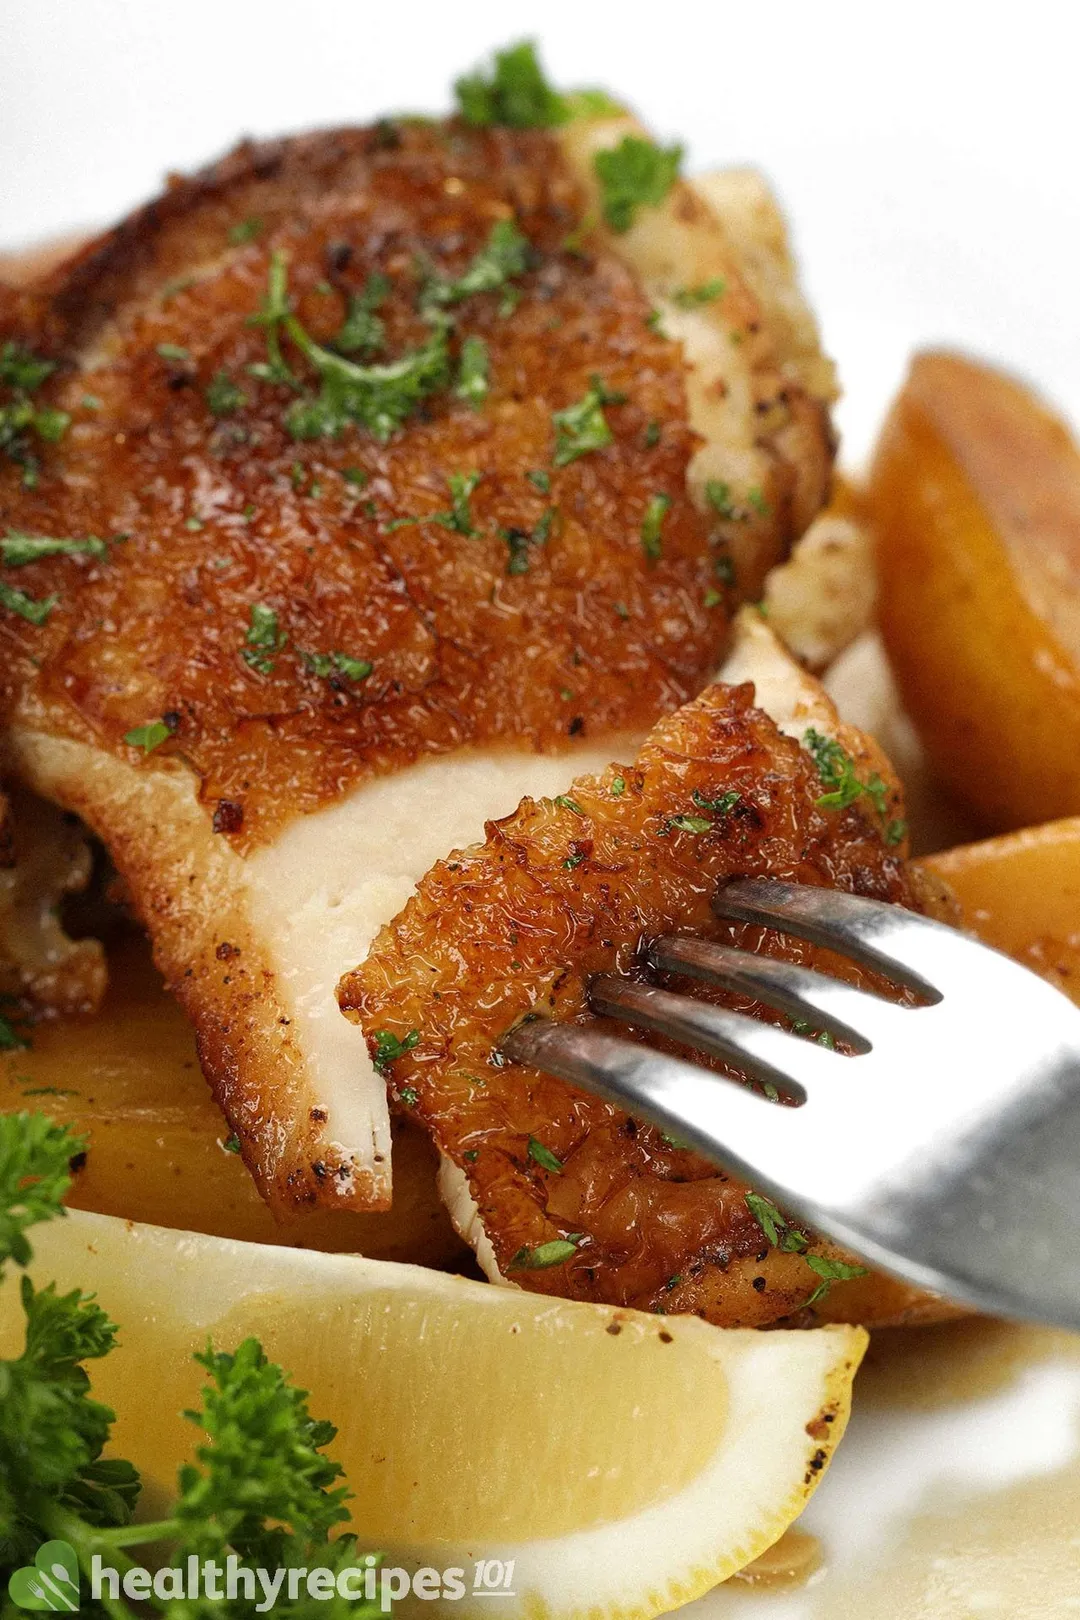 A close-up shot of a fork piercing into a piece of brown cooked chicken, laid near a lemon wedge and fresh parsley